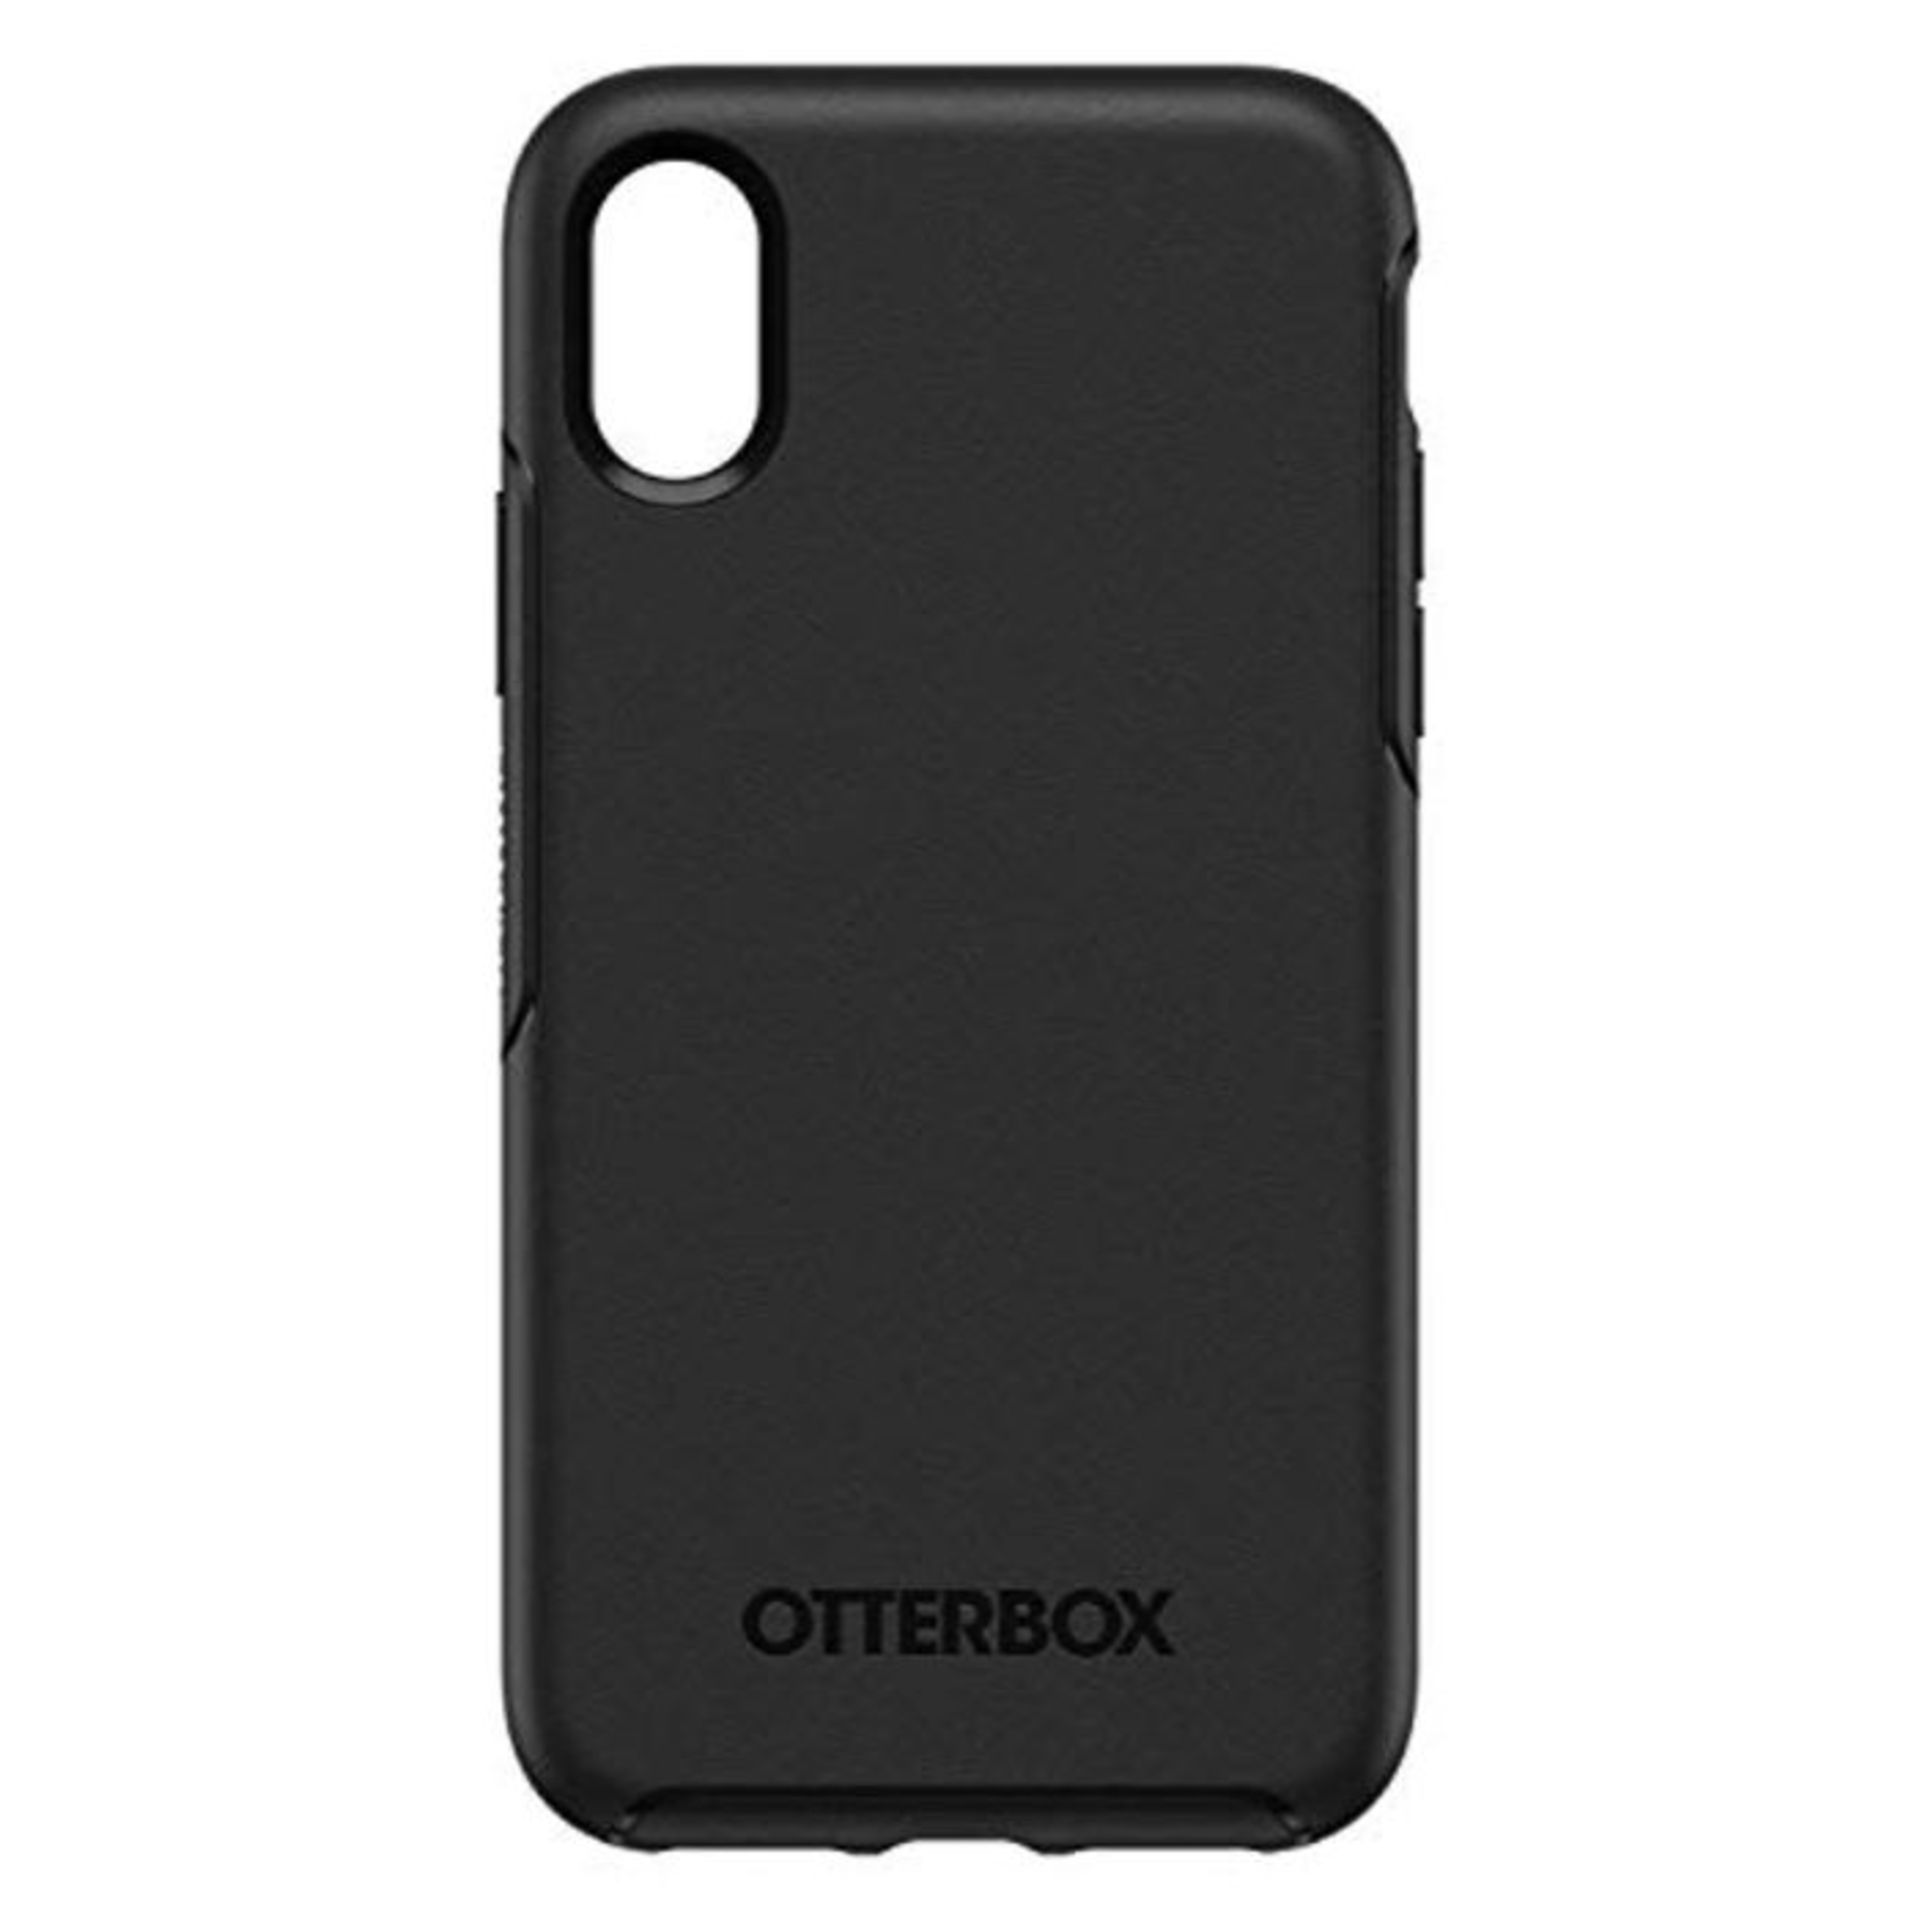 OtterBox (77-59572) Symmetry Series Sleek Protection for iPhone X/XS - Black